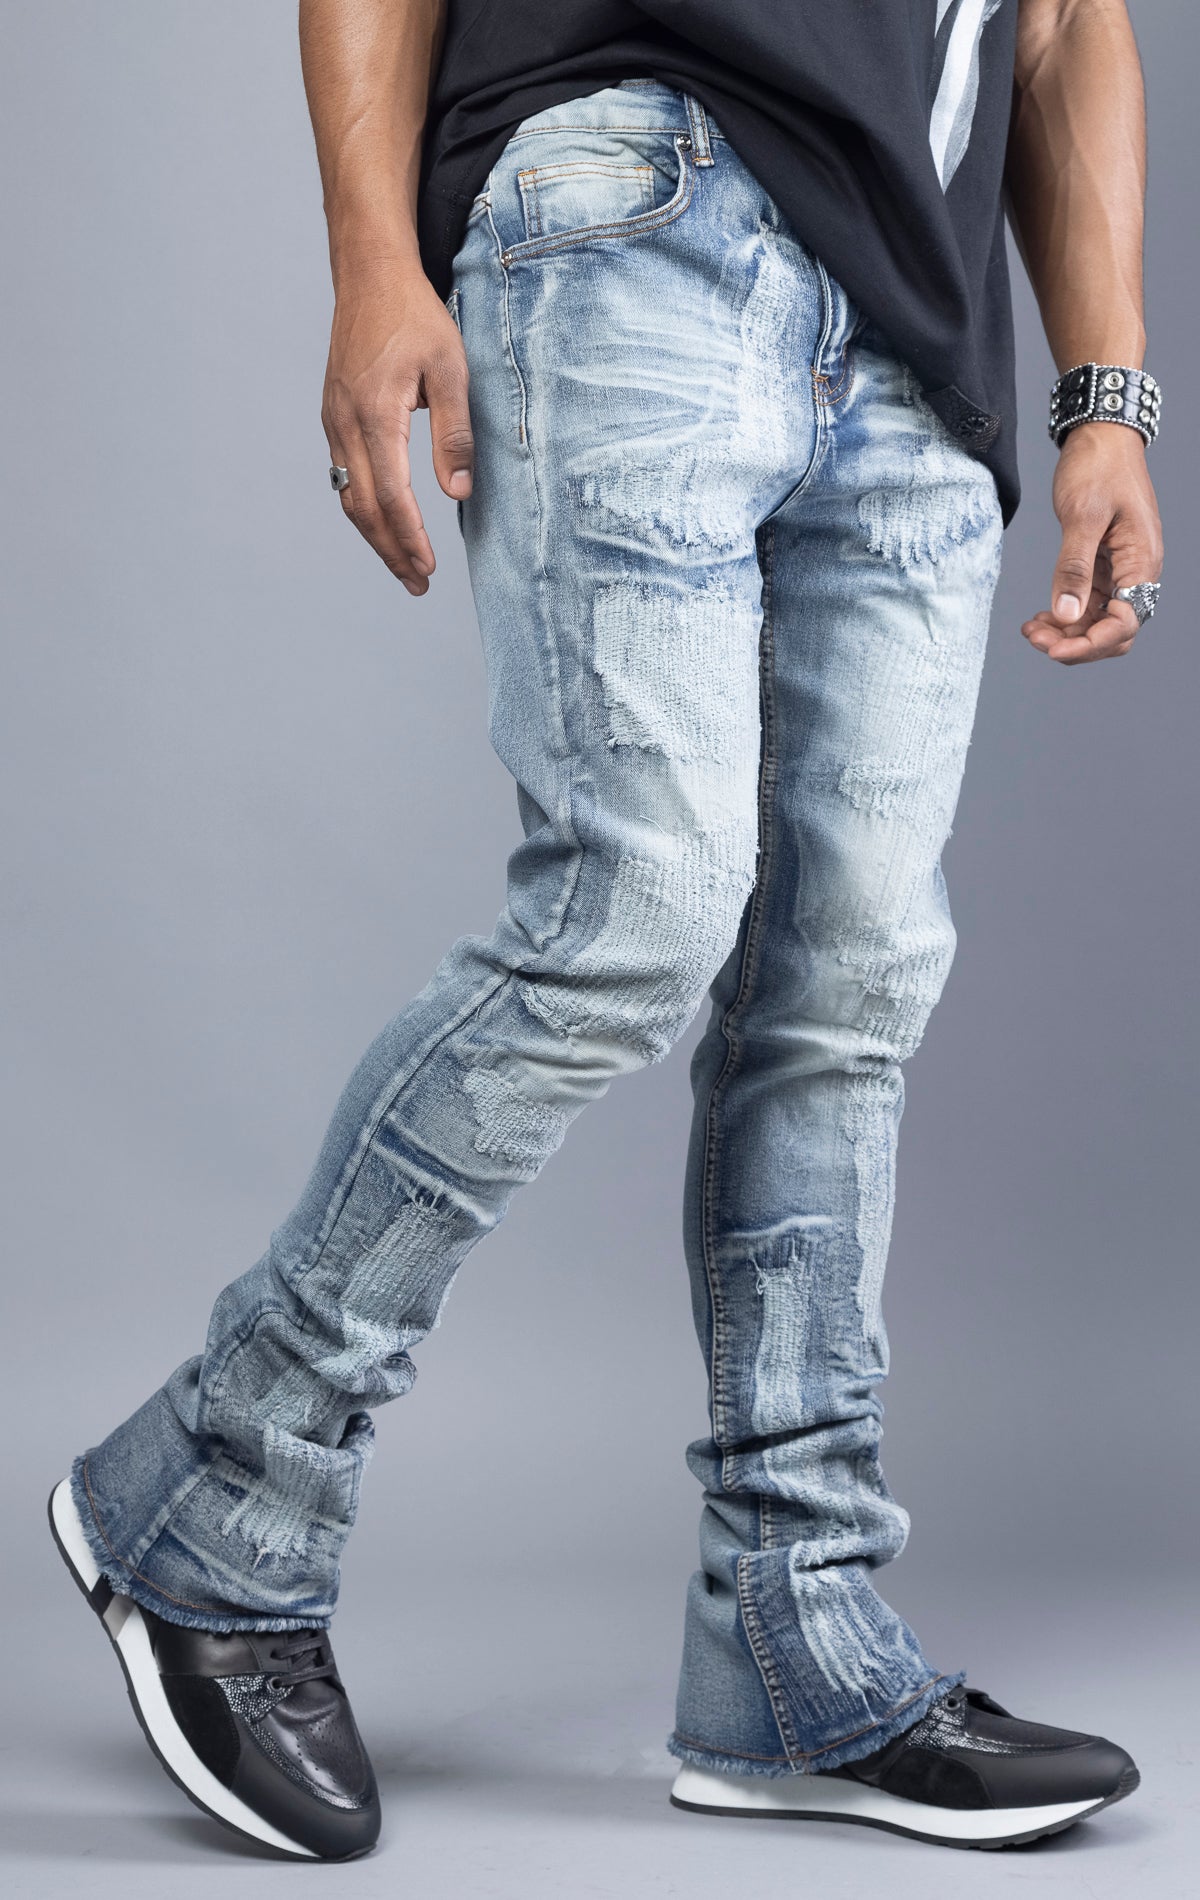 Blue distressed skinny jeans featuring ripped accents throughout the leg and a stacked fit at the ankle for a trendy, edgy look.